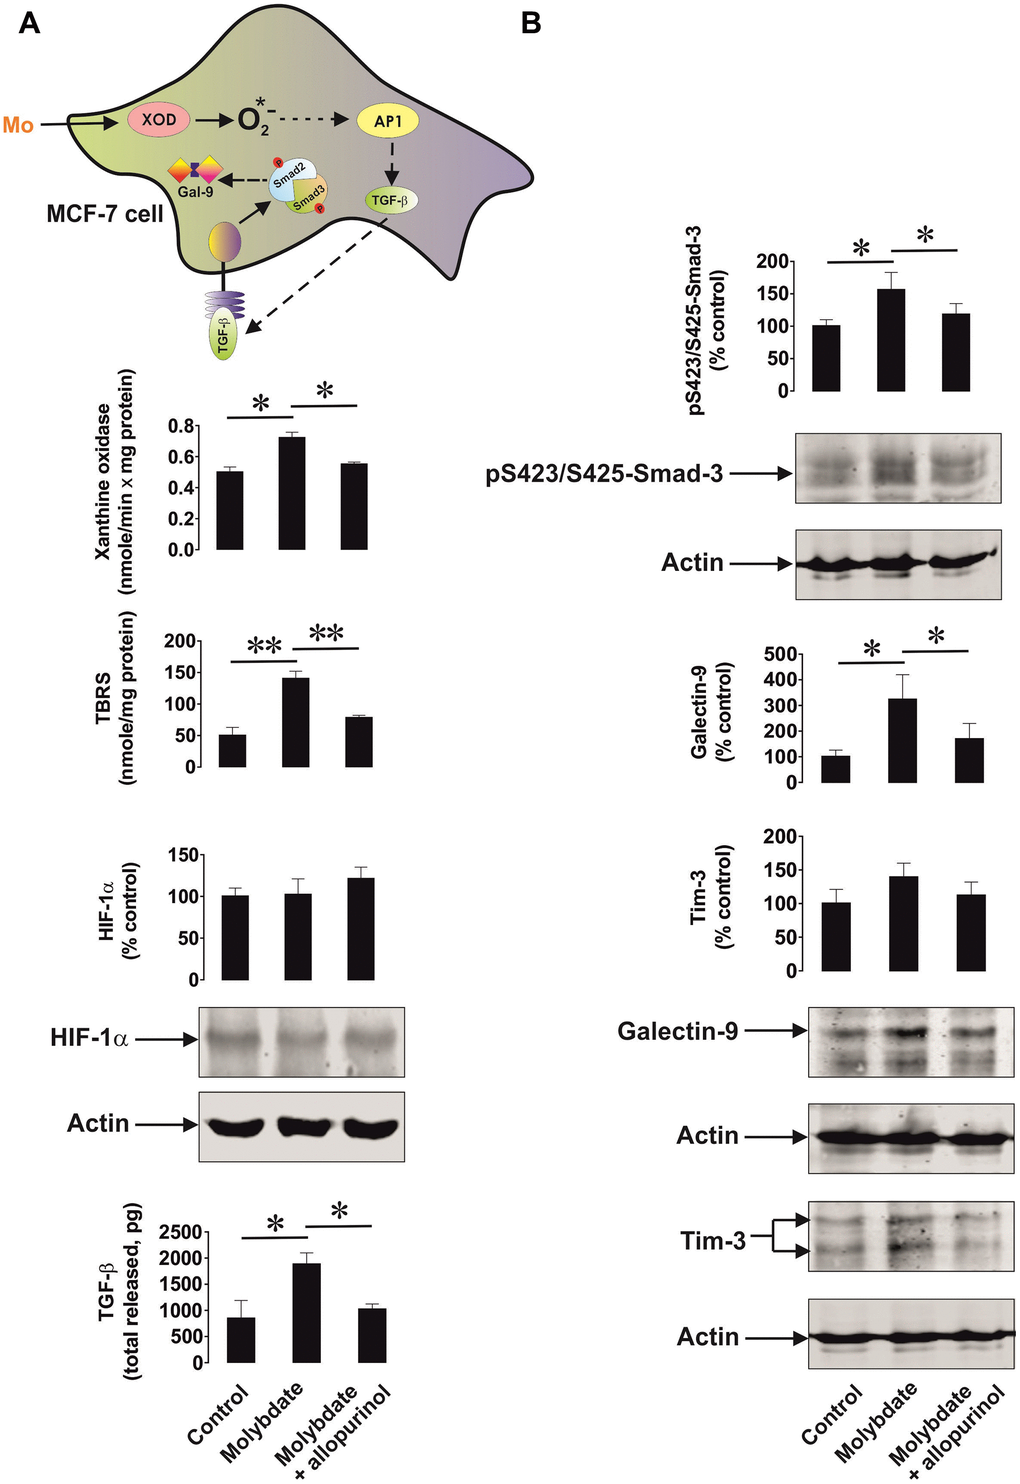 Xanthine oxidase activation leads to increased oxidative stress and upregulation of the TGF-β/Smad3 pathway as well as galectin-9 expression. MCF-7 human breast cancer cells were exposed to ammonium molybdate for 24 h to induce xanthine oxidase activity in the absence or presence of the xanthine oxidase inhibitor allopurinol. Xanthine oxidase activity, TBRS levels, HIF-1α accumulation, secreted TGF-β (A), and cell-associated phospho-S423/S425-Smad3, Tim-3 and galectin-9 (B) were analysed as outlined in the Materials and Methods. Images are from one experiment representative of four which gave similar results. Data are shown as mean values ± SEM of four independent experiments. * - p vs indicated events.